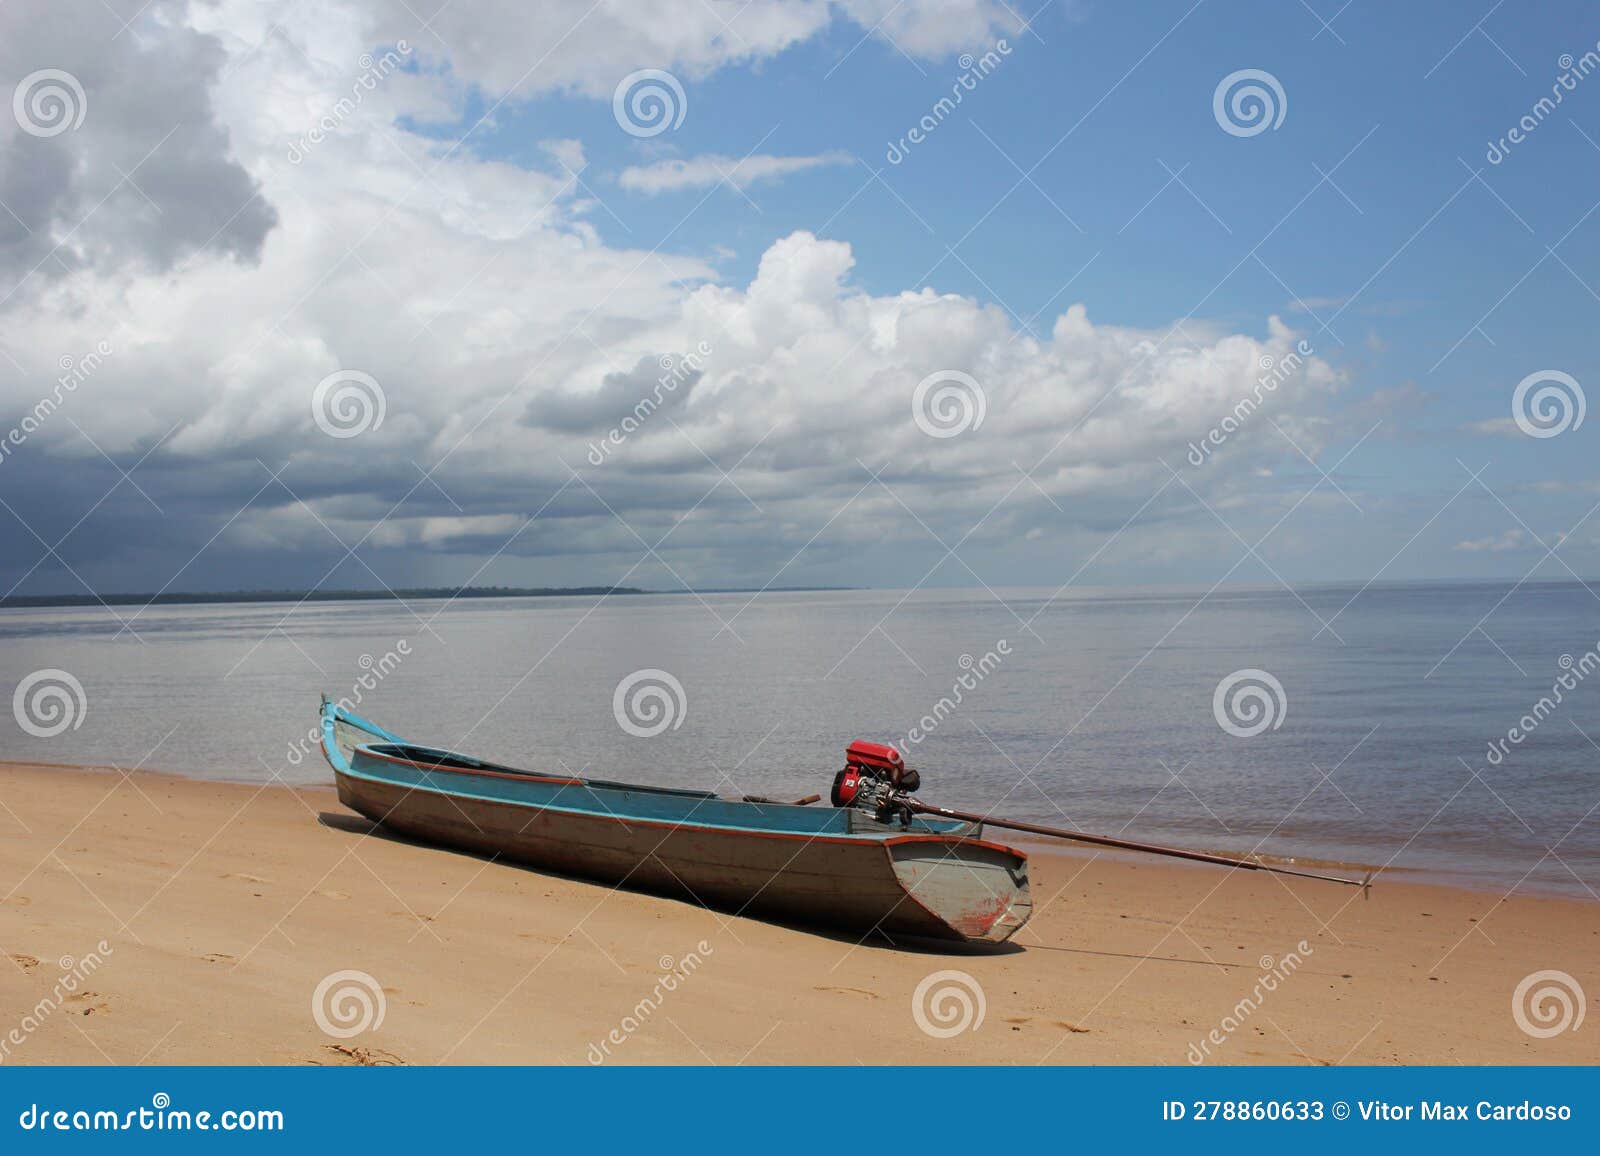 a boat rests on the sands of one of the river beaches